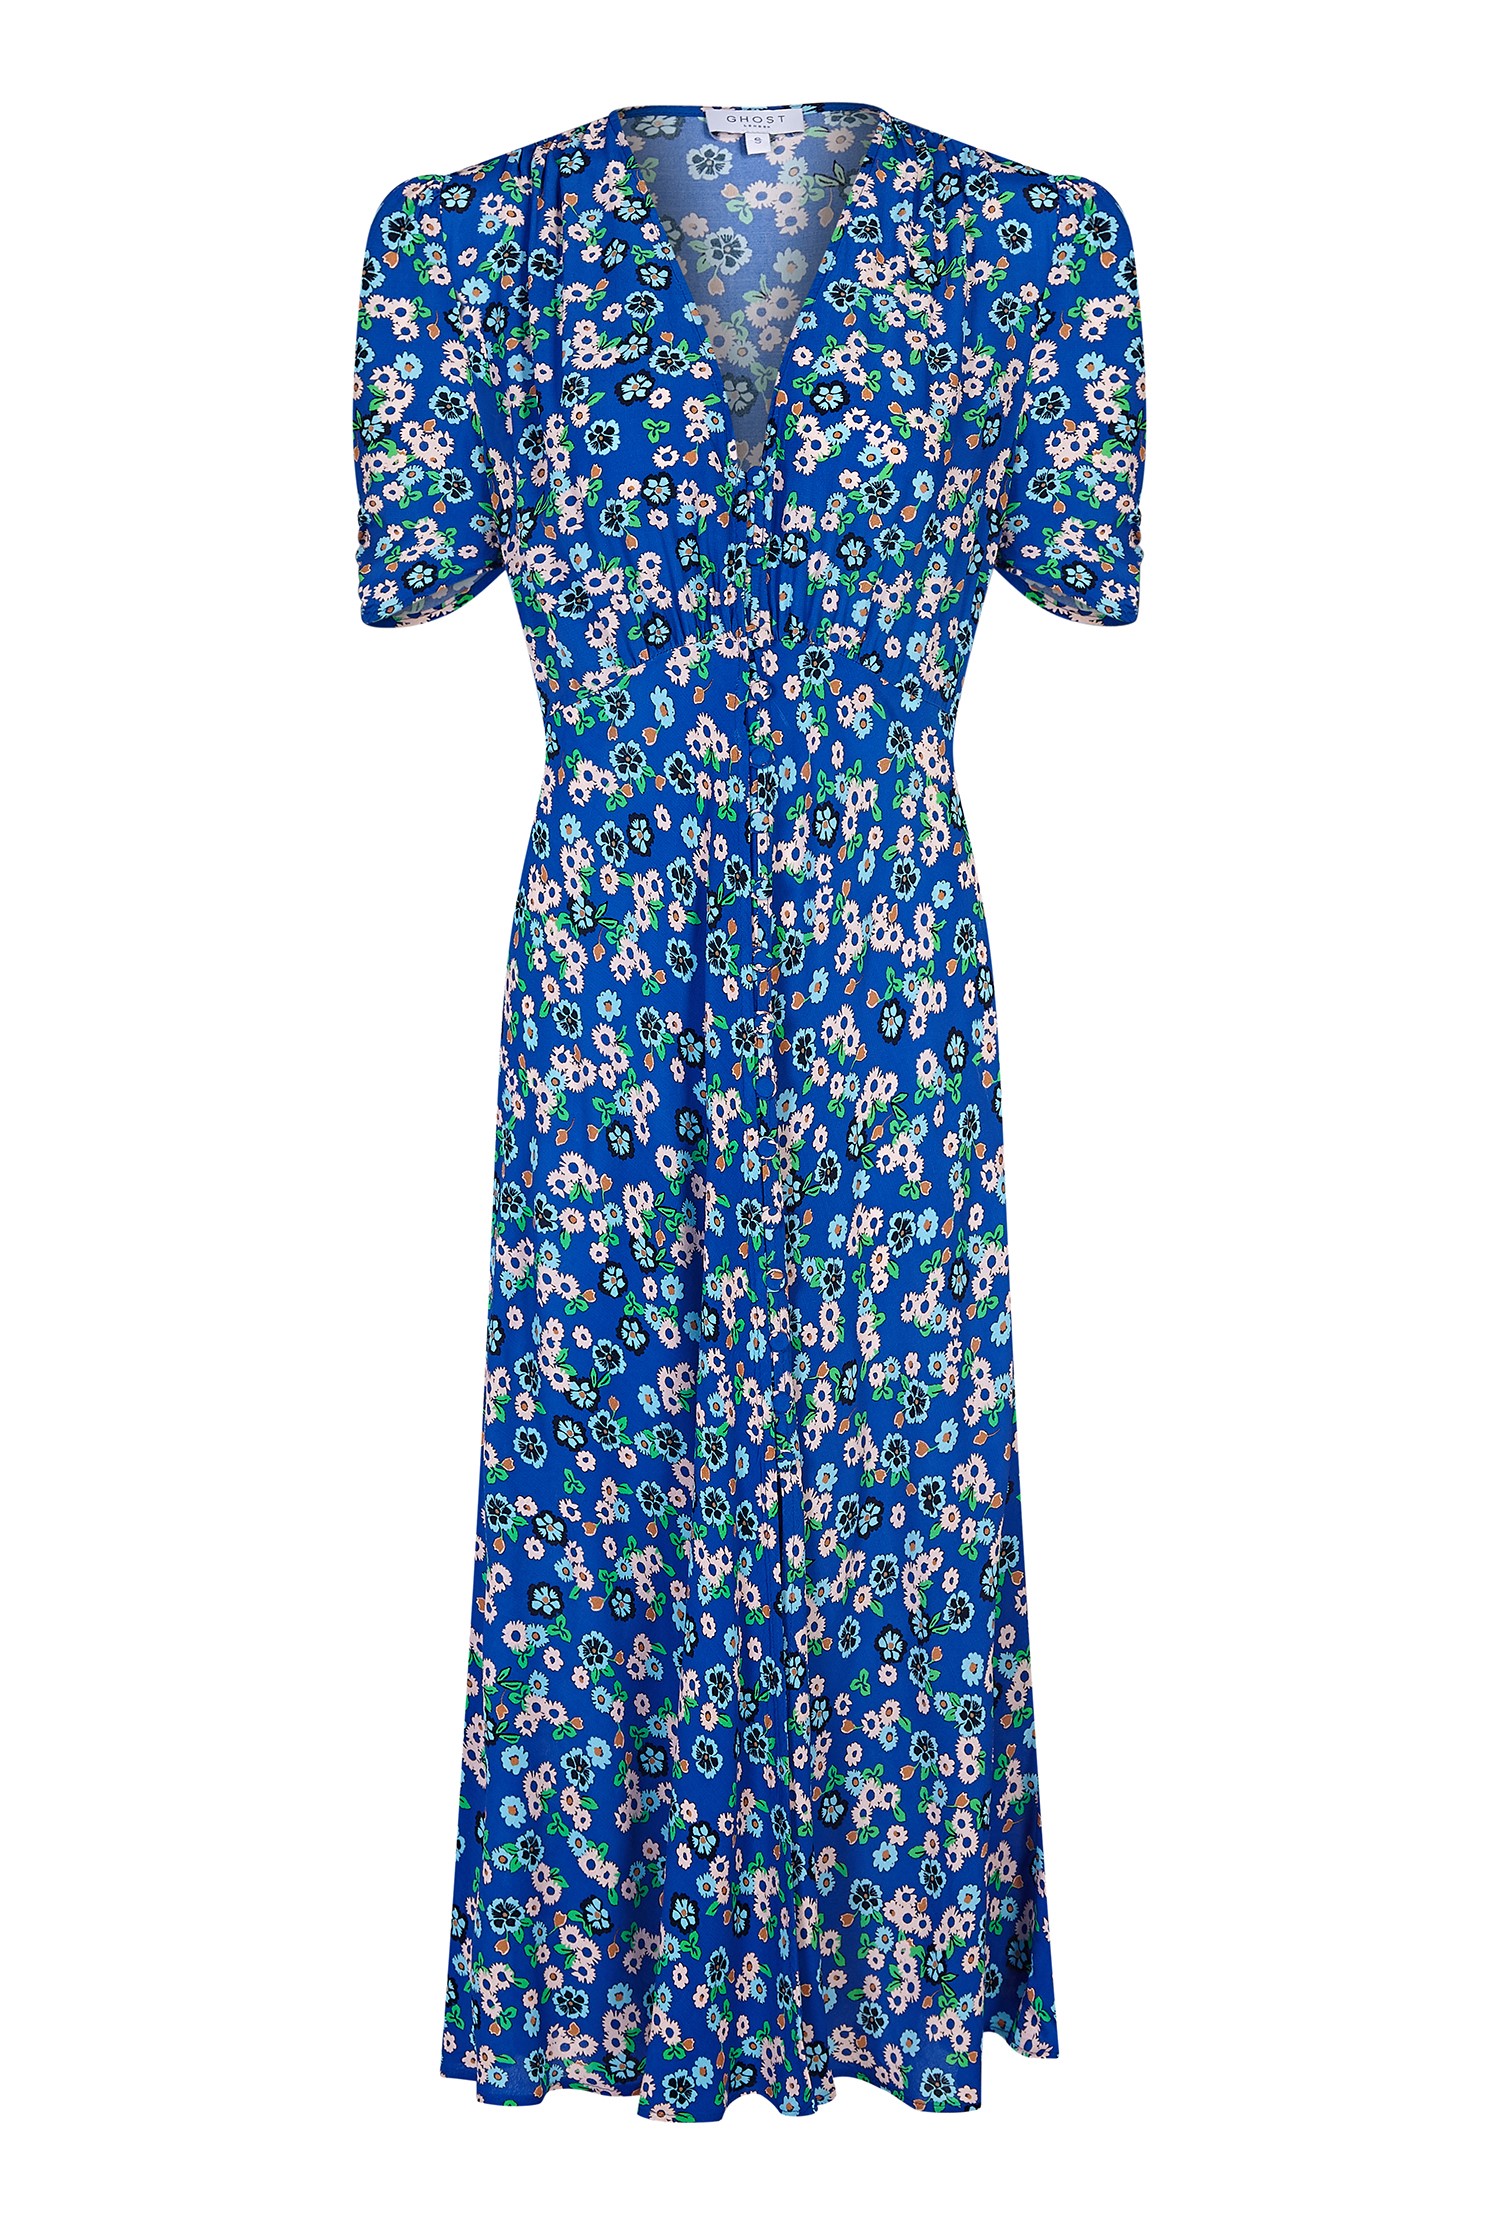 Crepe Midi Dress with Short Sleeves in Blue Print | Ghost London